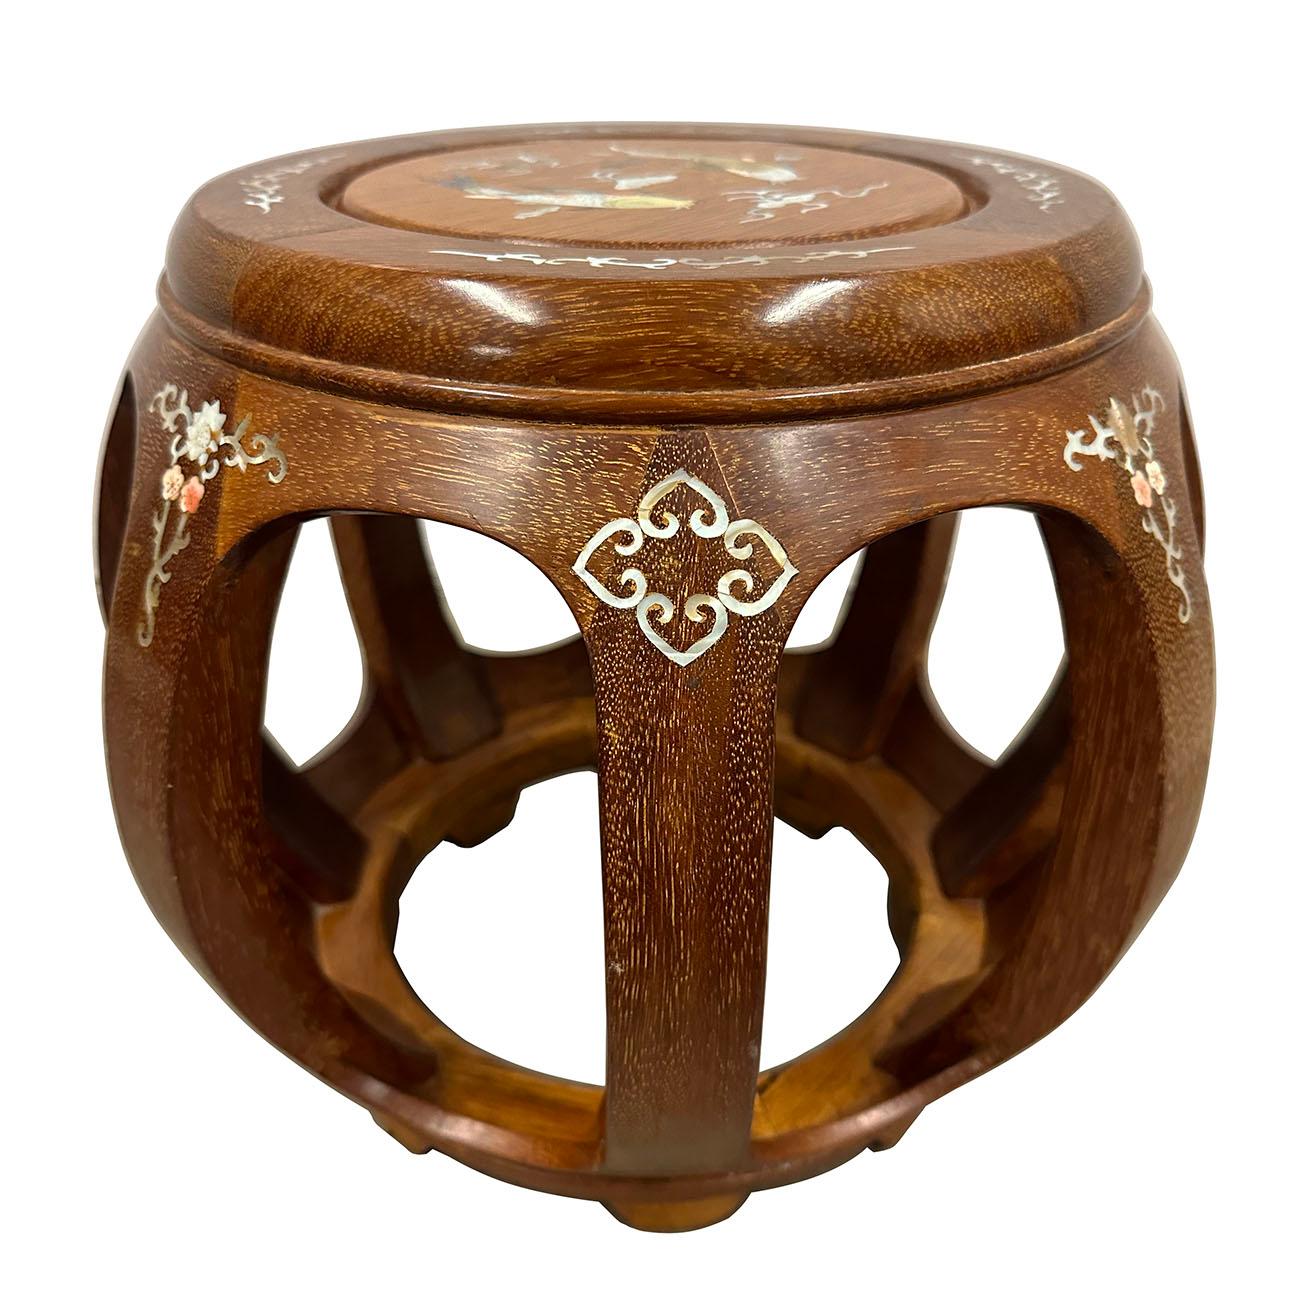 Chinese Export Mid-20th Century Chinese Hardwood Stool with Mather of Pearl Inlay